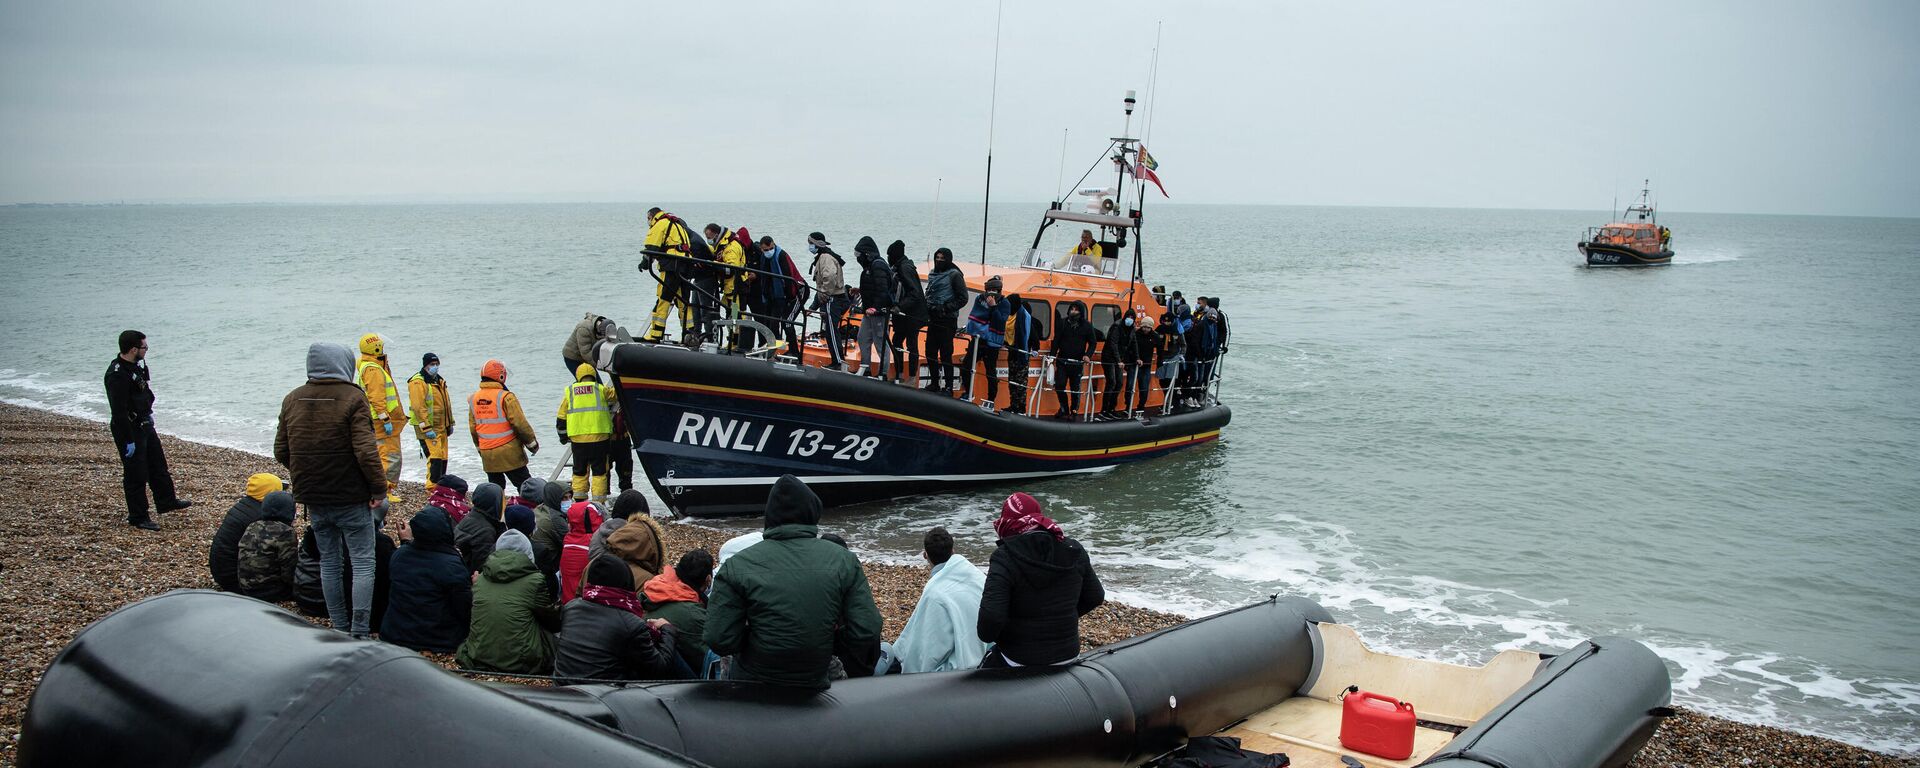 Migrants sit beside a boat used to cross the English Channel as more migrants are helped ashore from a RNLI (Royal National Lifeboat Institution) lifeboat at a beach in Dungeness, on the south-east coast of England, on November 24, 2021 - Sputnik International, 1920, 05.03.2022